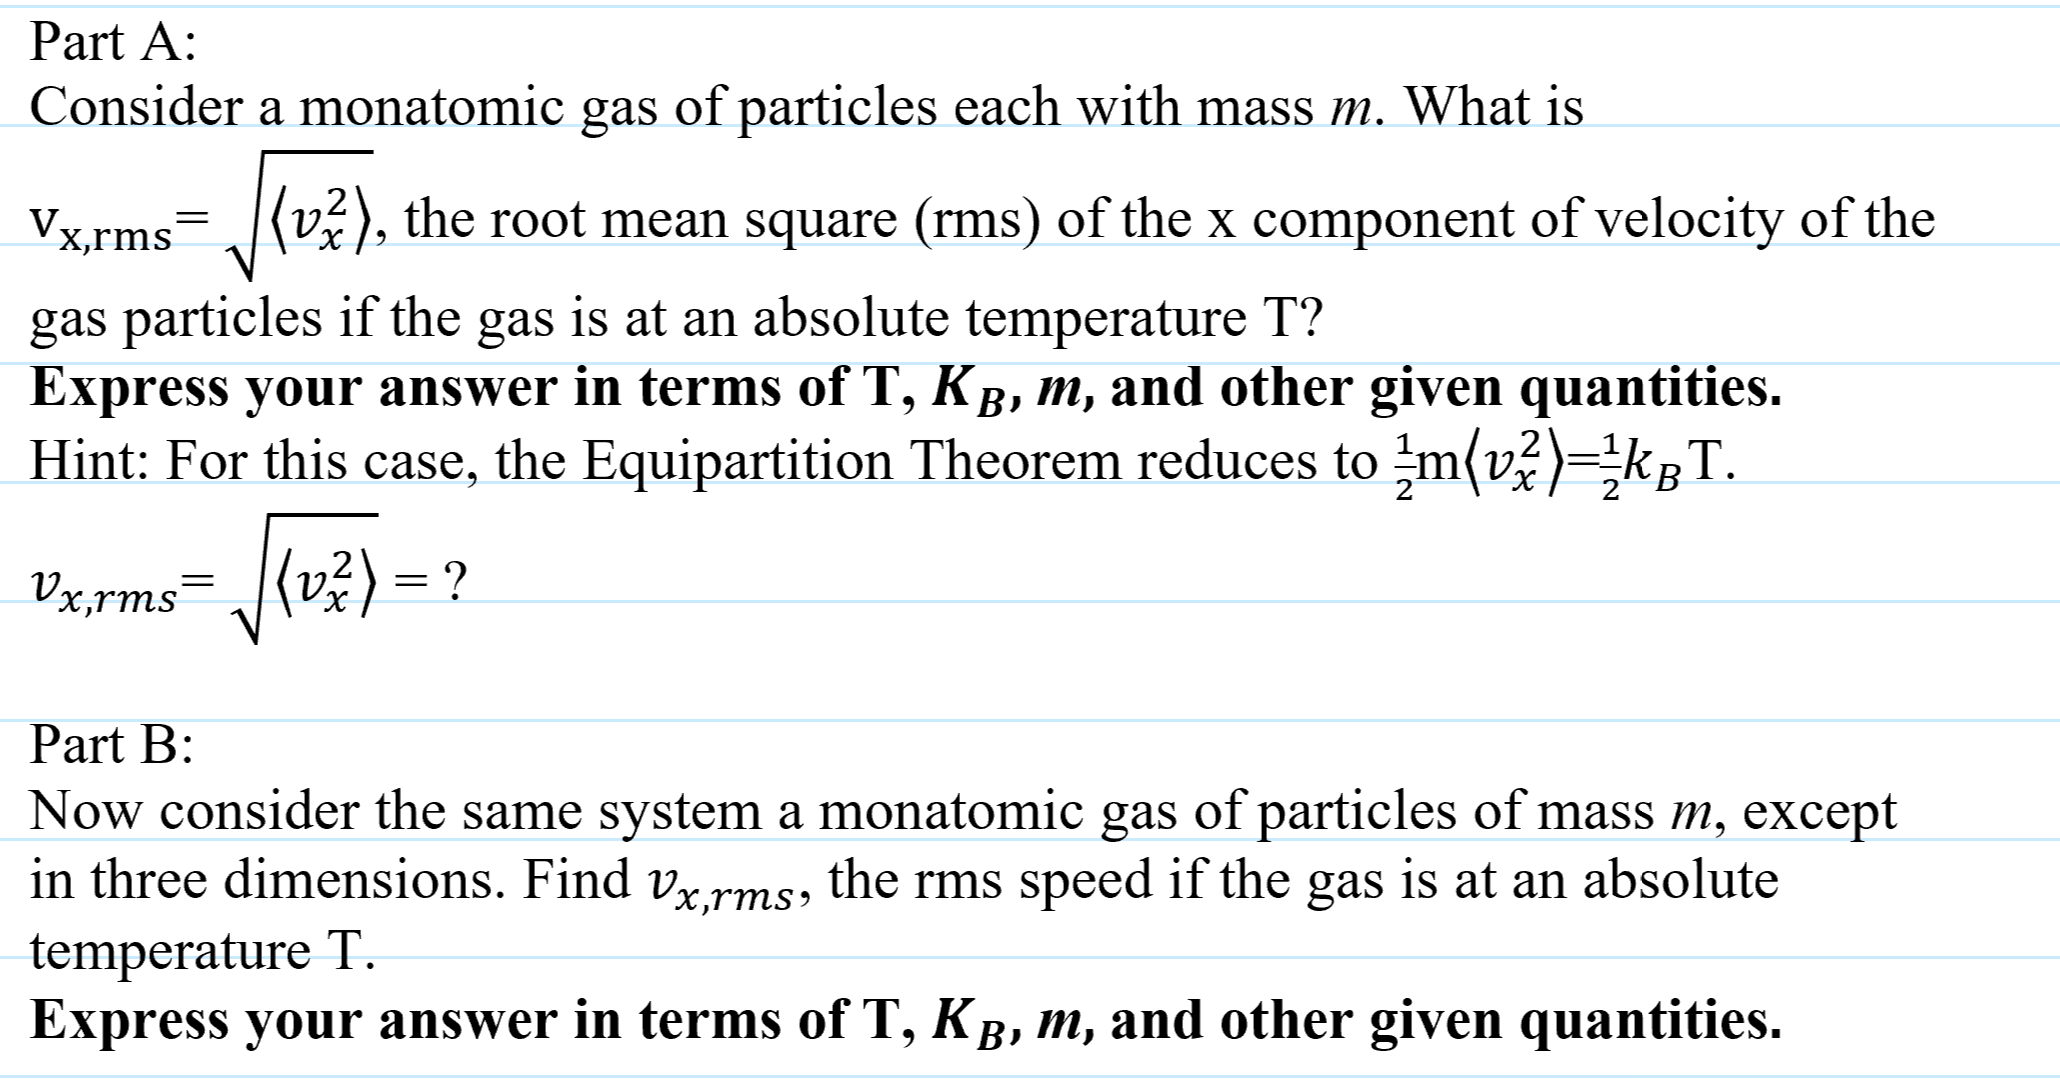 Part A:
Consider a monatomic gas of particles each with mass m. What is
Vx,rms
=,v²), the root mean square (rms) of the x component of velocity of the
gas particles if the gas is at an absolute temperature T?
Express your answer in terms of T, KB, m, and other given quantities.
Hint: For this case, the Equipartition Theorem reduces to m(v)=kgT.
Vx,rms=J{v%) = ?
Part B:
Now consider the same system a monatomic gas of particles of mass m, except
in three dimensions. Find vx,rms, the rms speed if the gas is at an absolute
temperature T.
Express your answer in terms of T, KB, m, and other given quantities.
